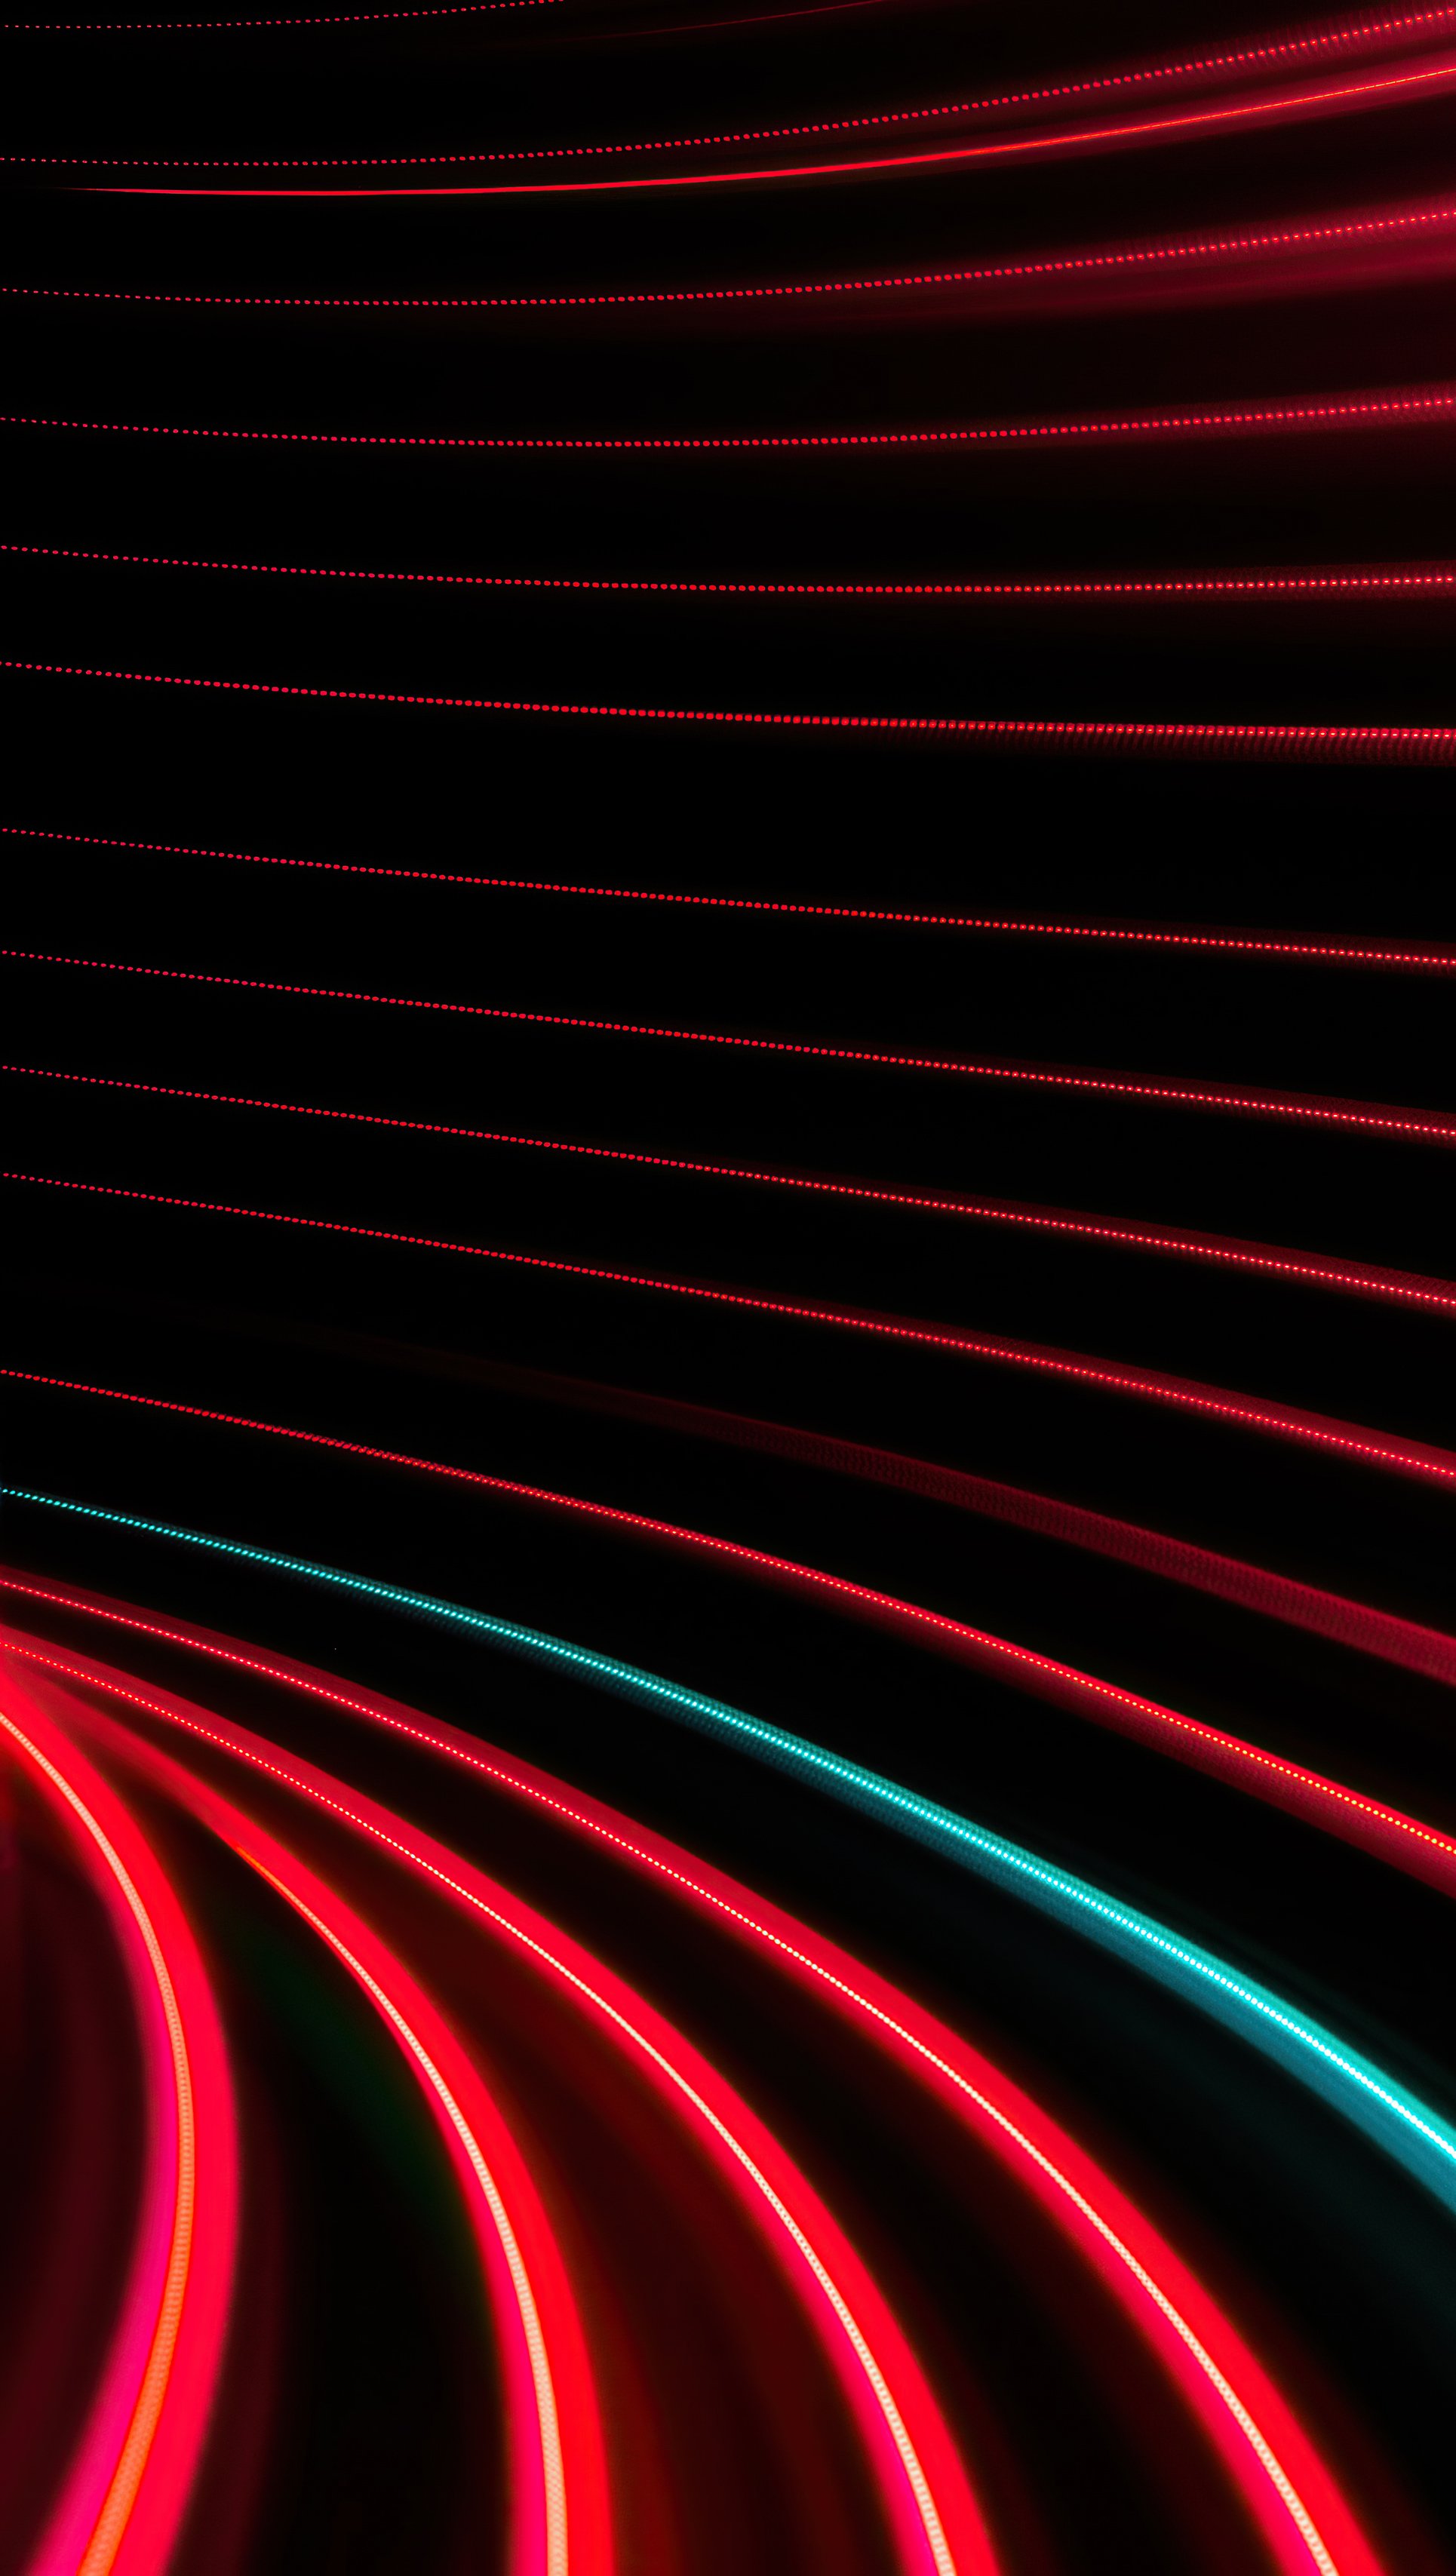 Swirl of red and black lines Wallpaper 5k Ultra HD